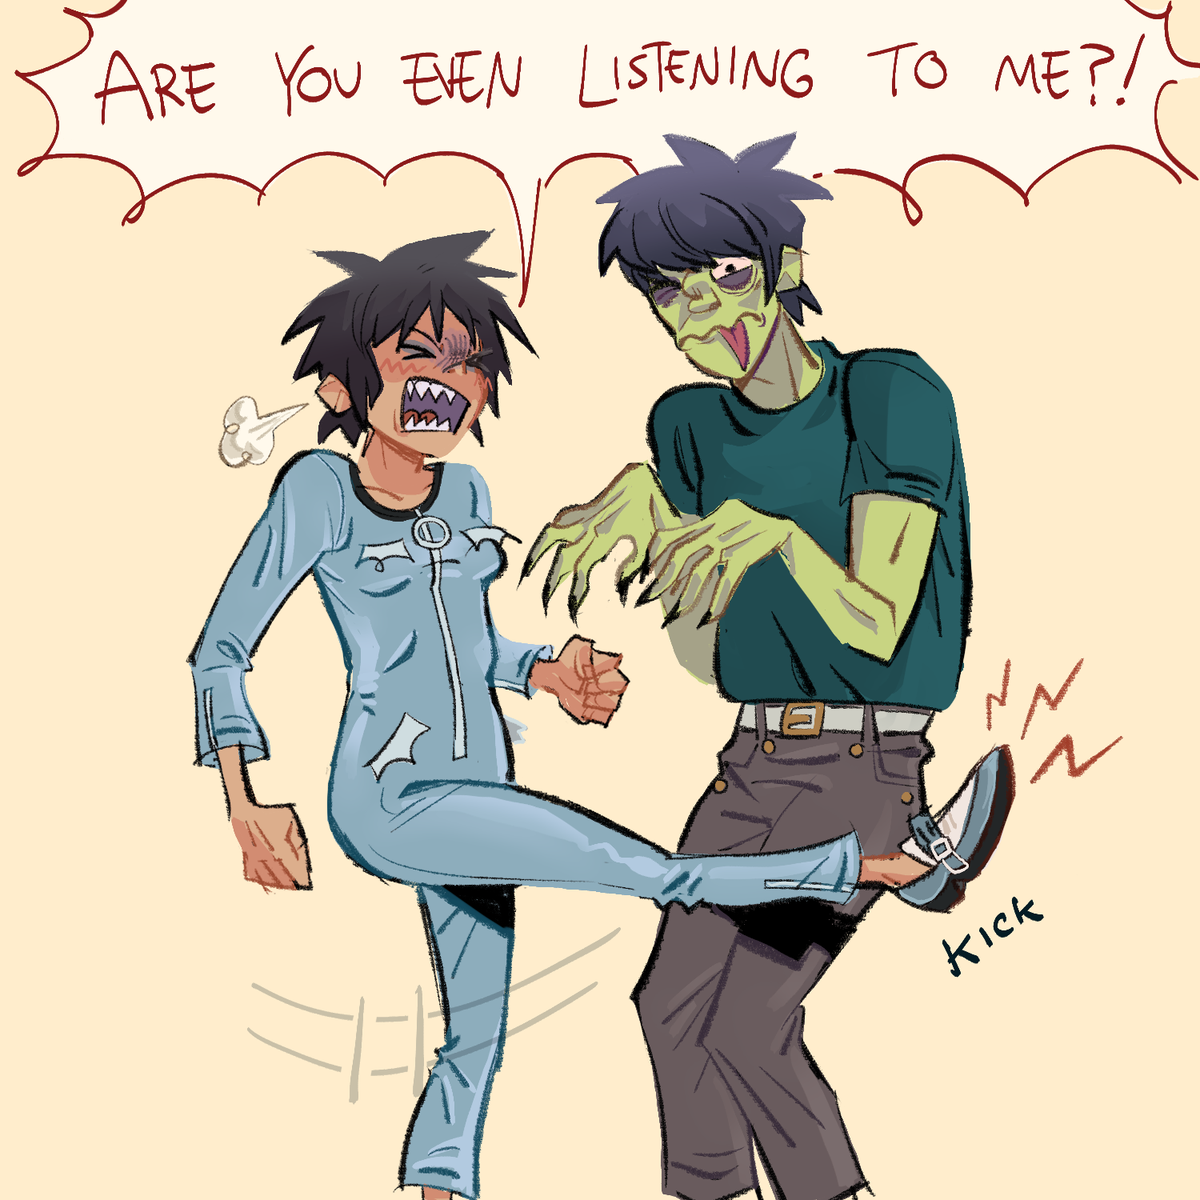 based on that phineas and ferb scene (running in circles like a rabid animal) ( gorillaz ) 